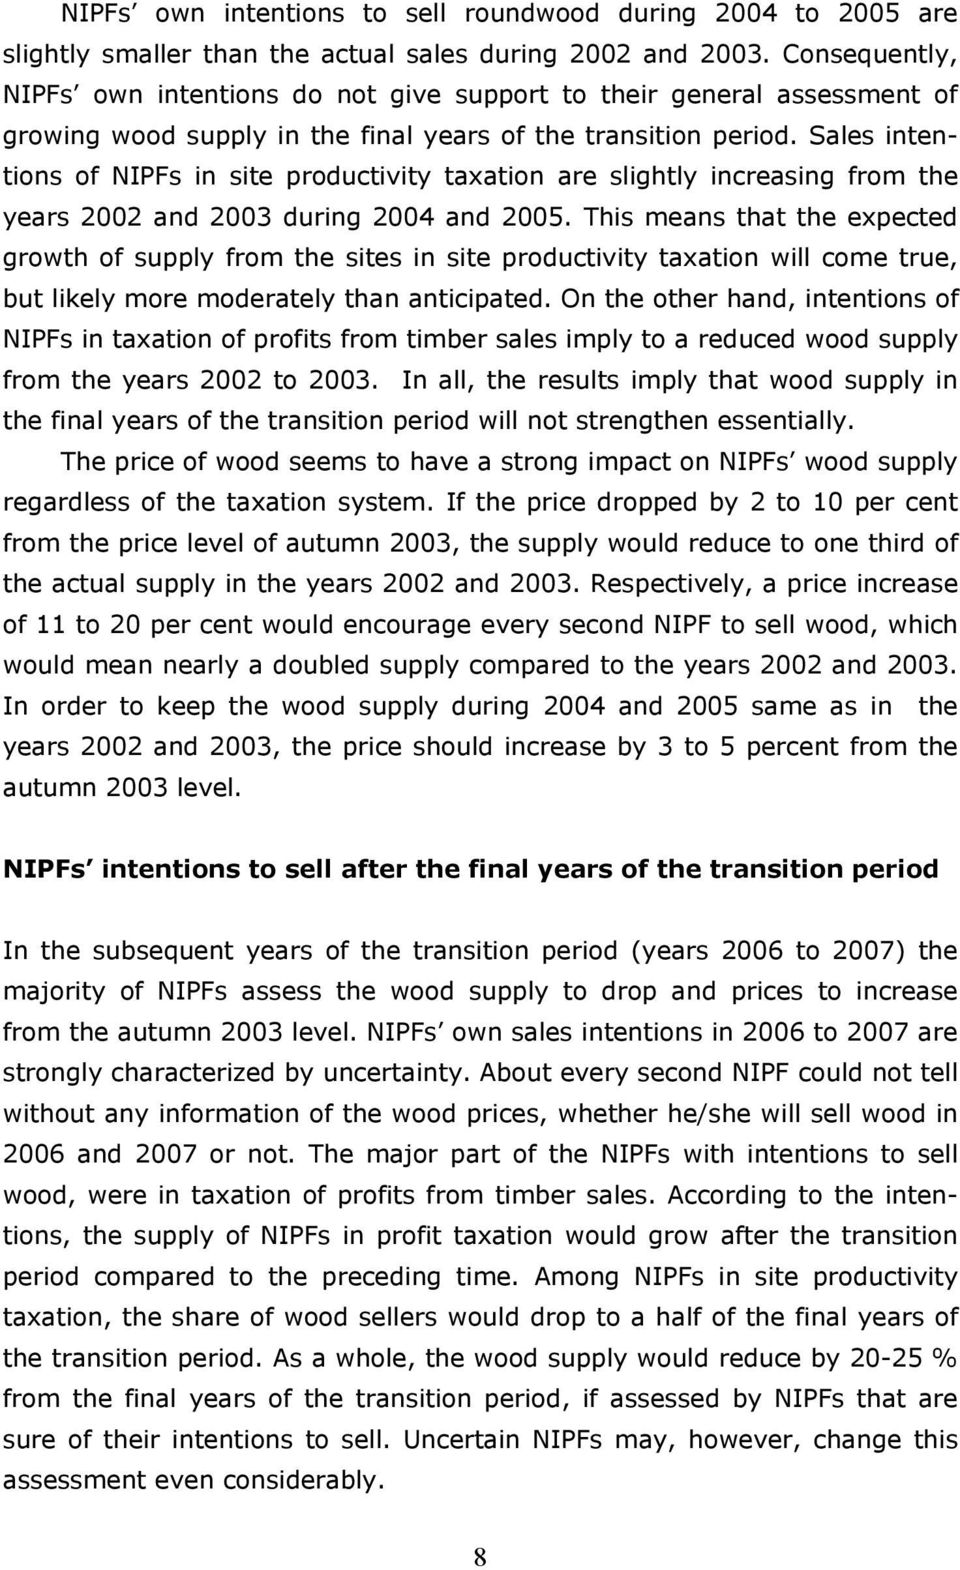 Sales intentions of NIPFs in site productivity taxation are slightly increasing from the years 2002 and 2003 during 2004 and 2005.